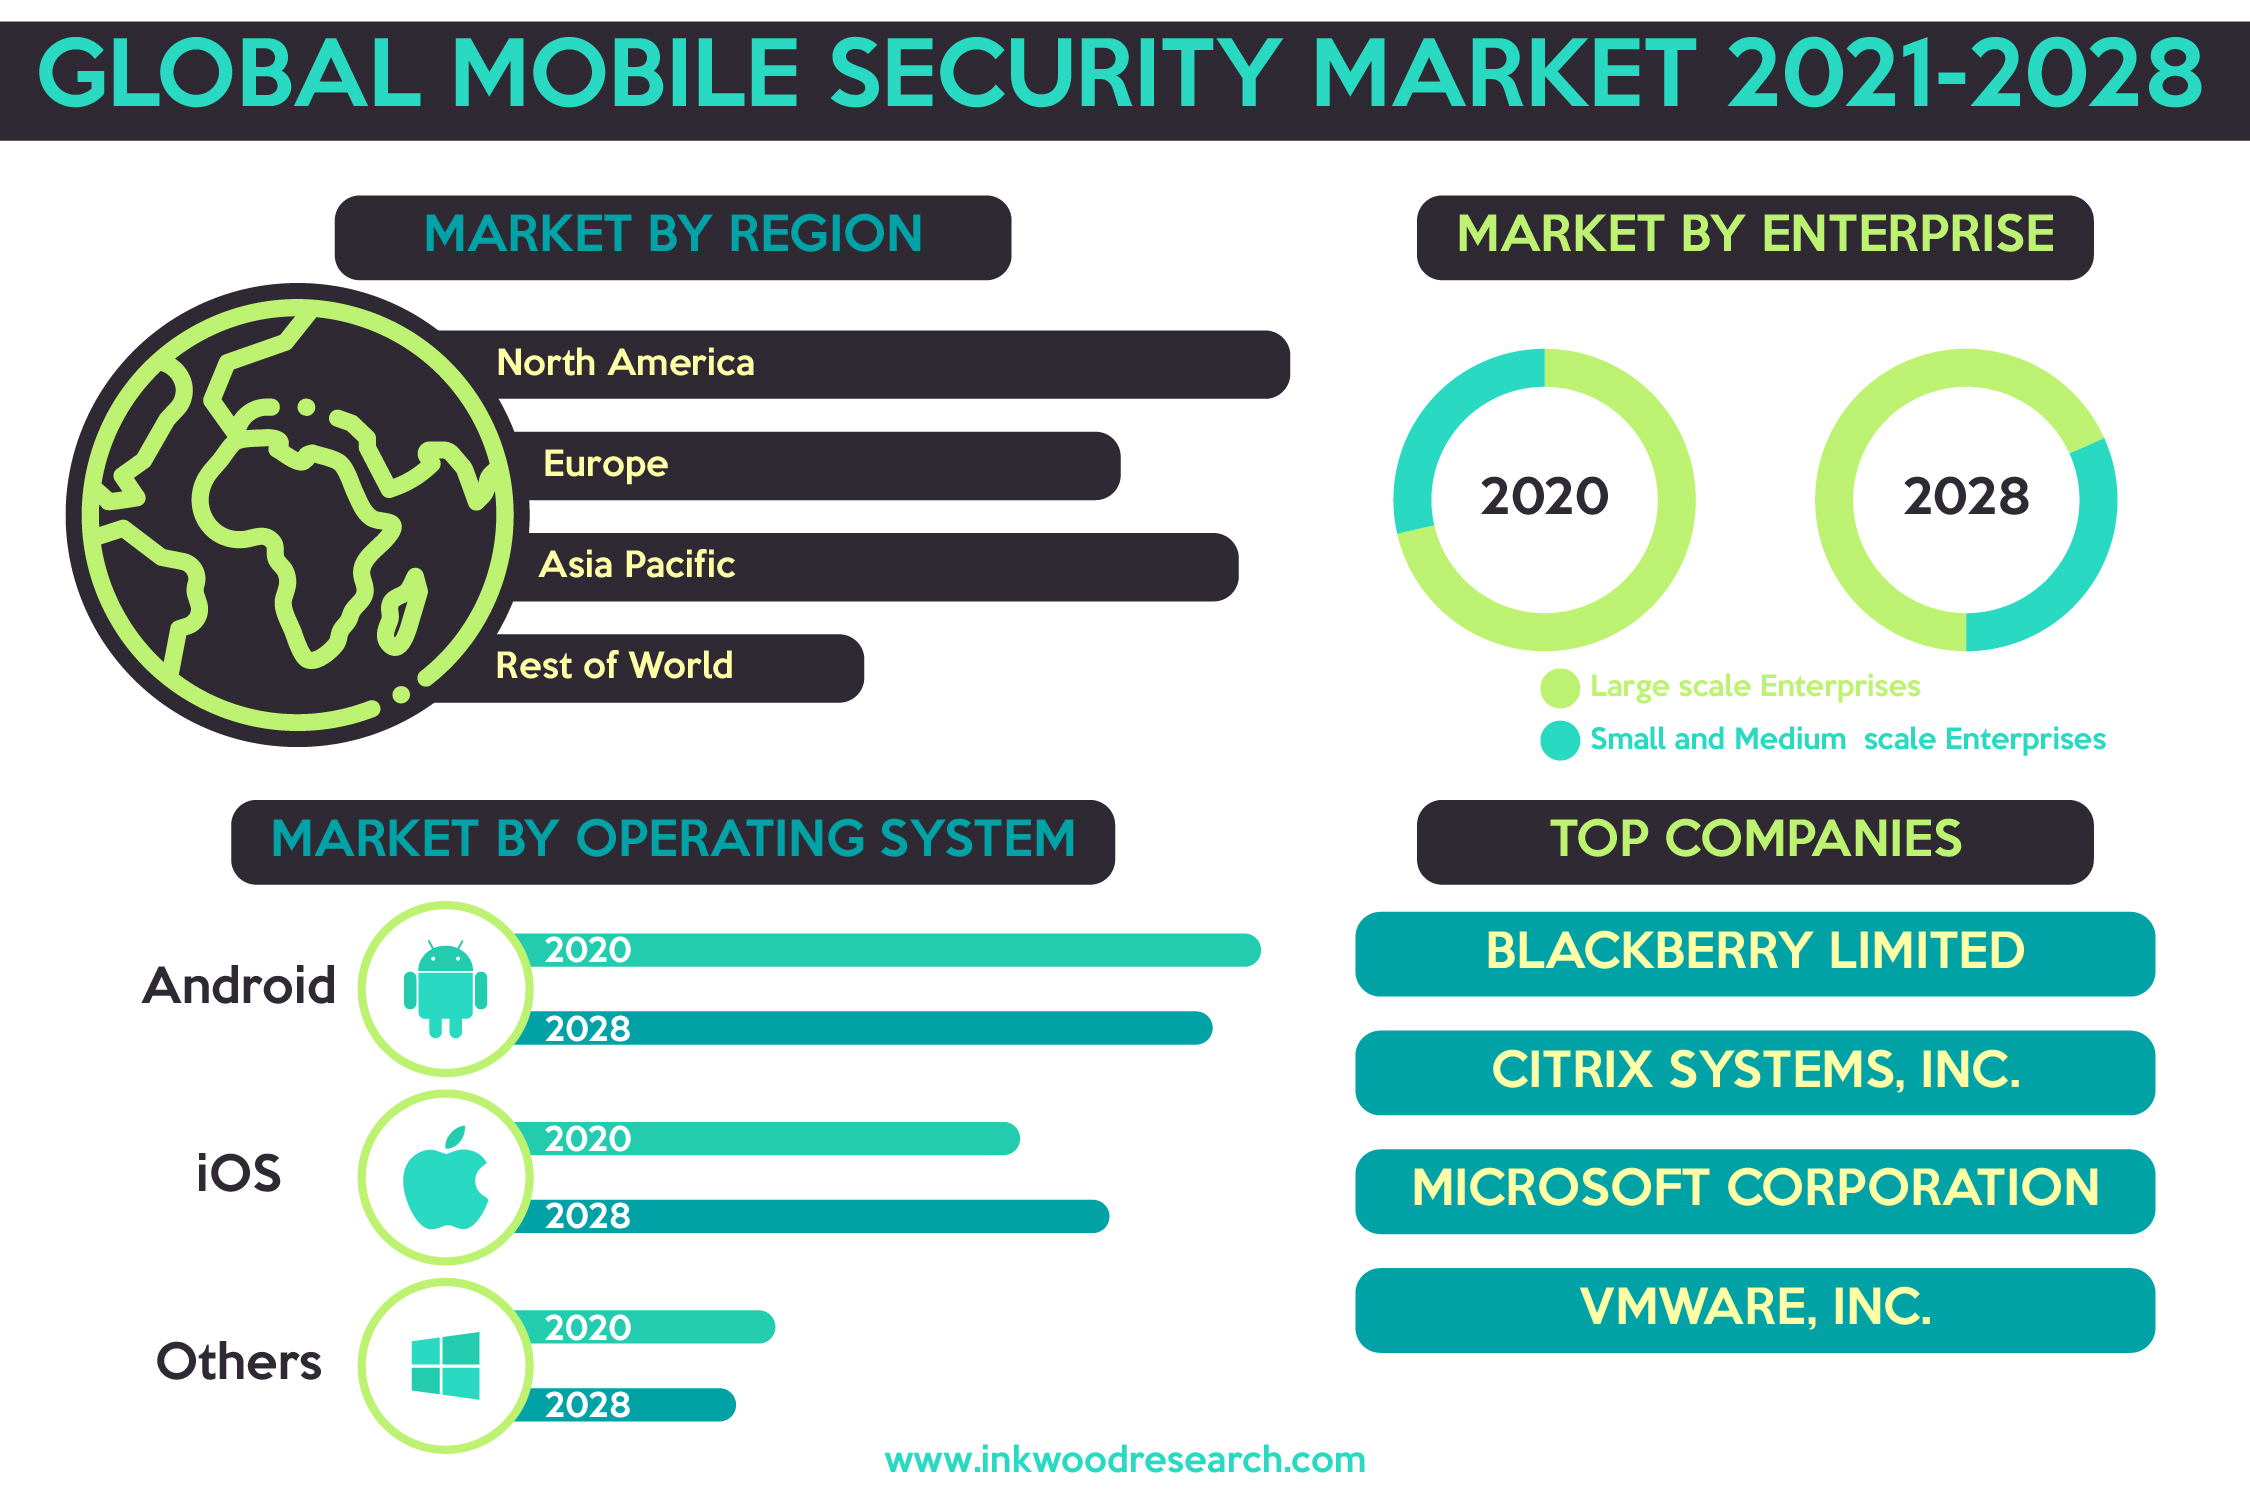 GROWING MOBILE PAYMENTS TO PUSH GROWTH IN THE GLOBAL MOBILE SECURITY MARKET